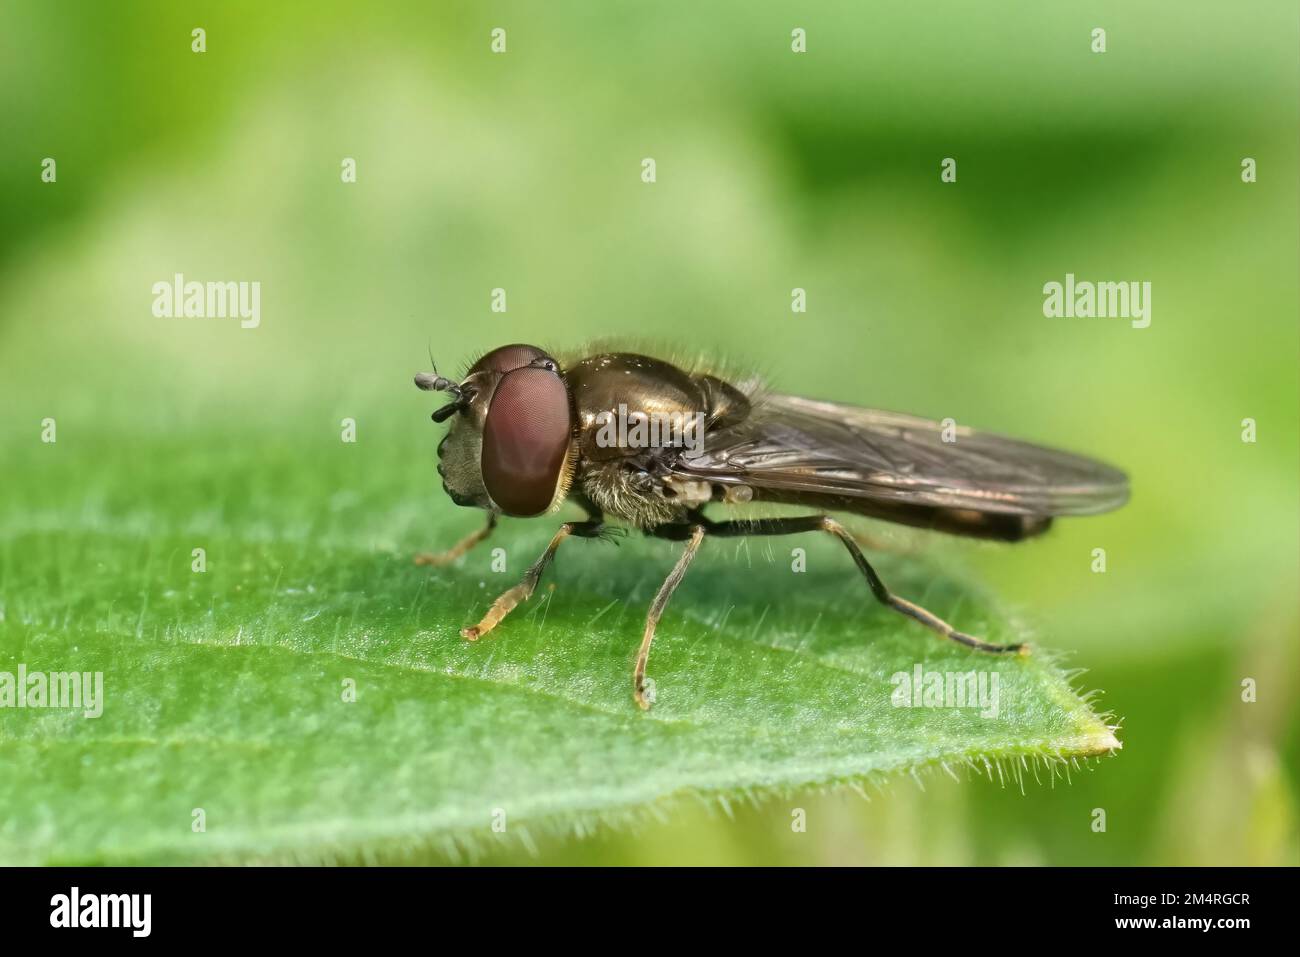 Natural closeup on the Platycheirus albimanus sitting on a green leaf in the garden Stock Photo